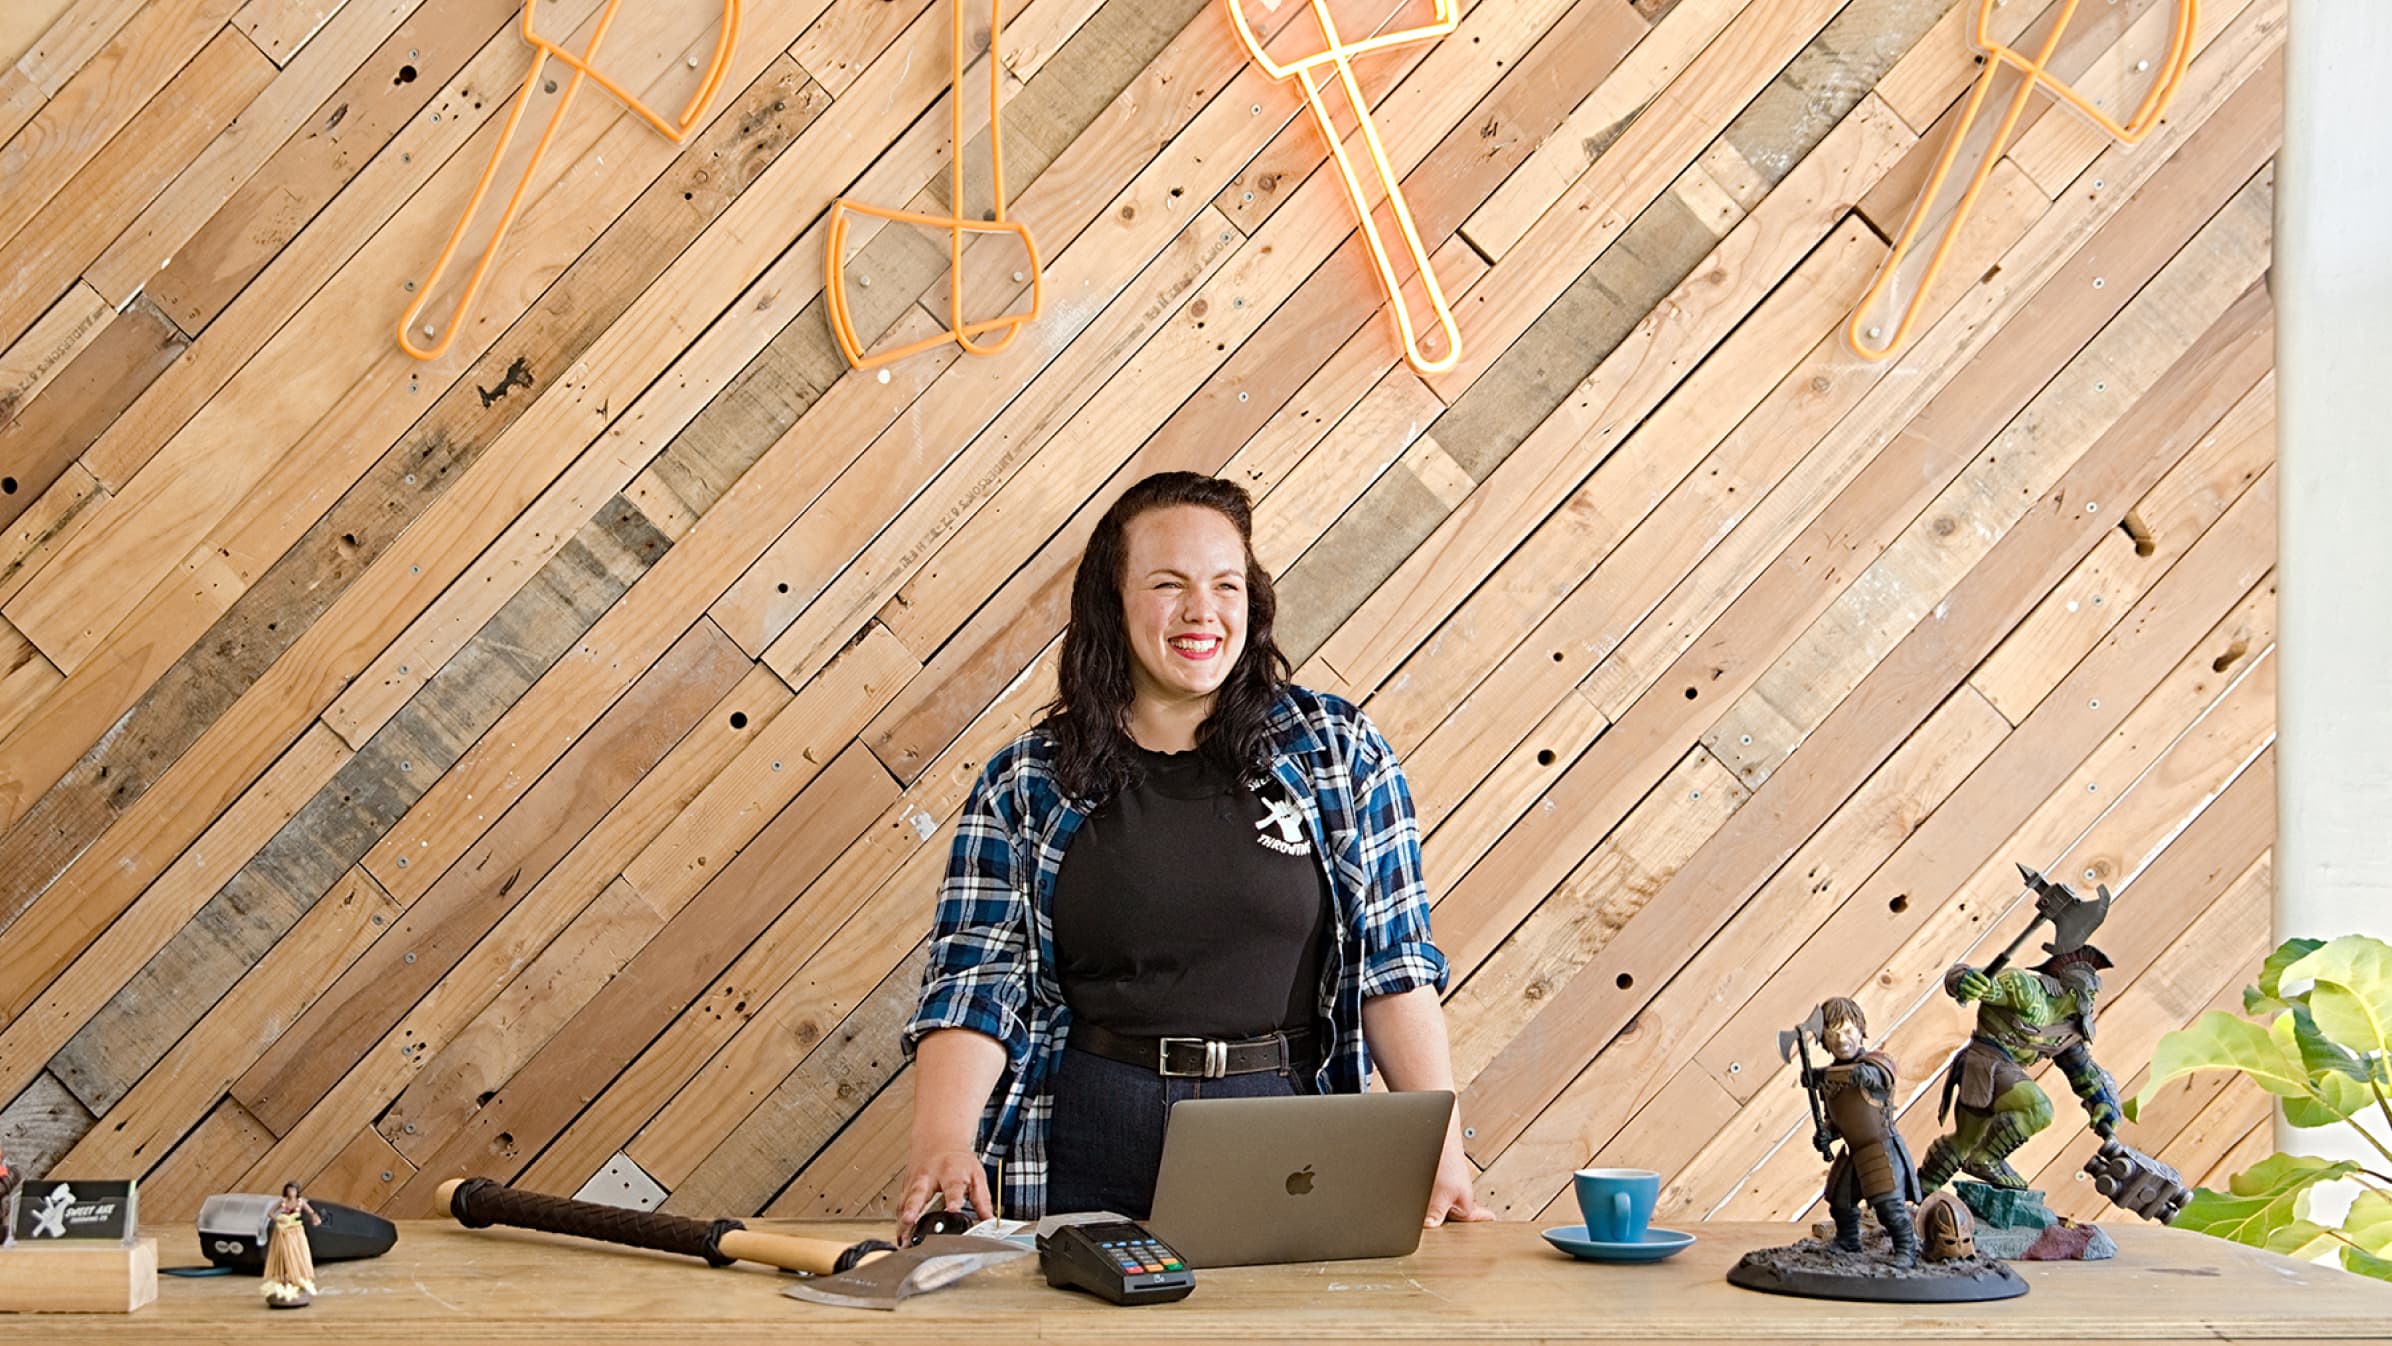 Sarah Hilyard behind a laptop in their office with an axe on the bench and axe artwork on the wall behind.